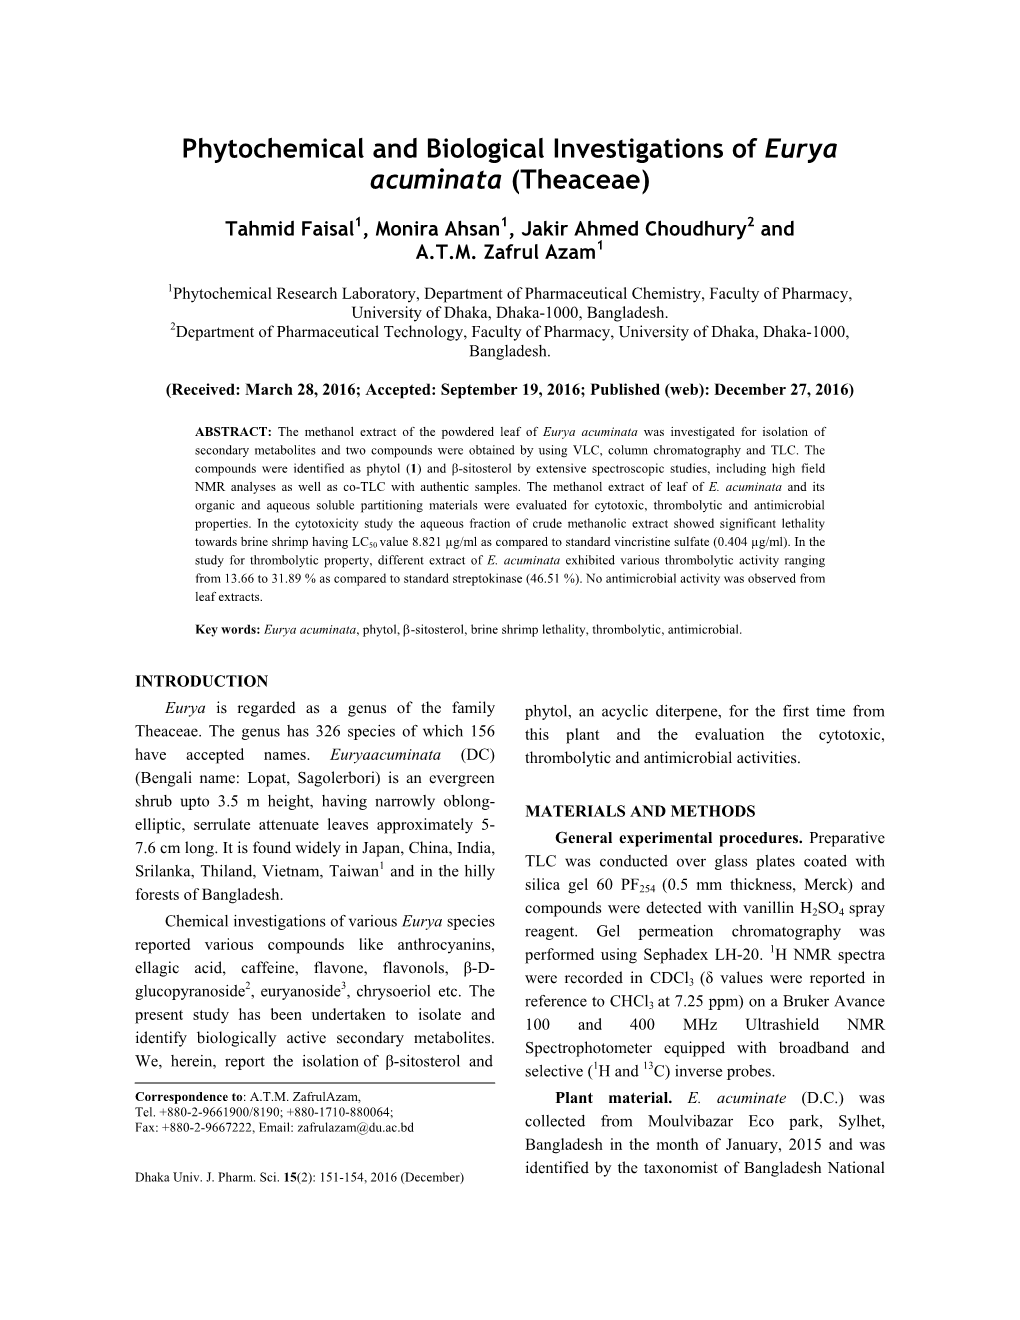 Phytochemical and Biological Investigations of Eurya Acuminata (Theaceae)